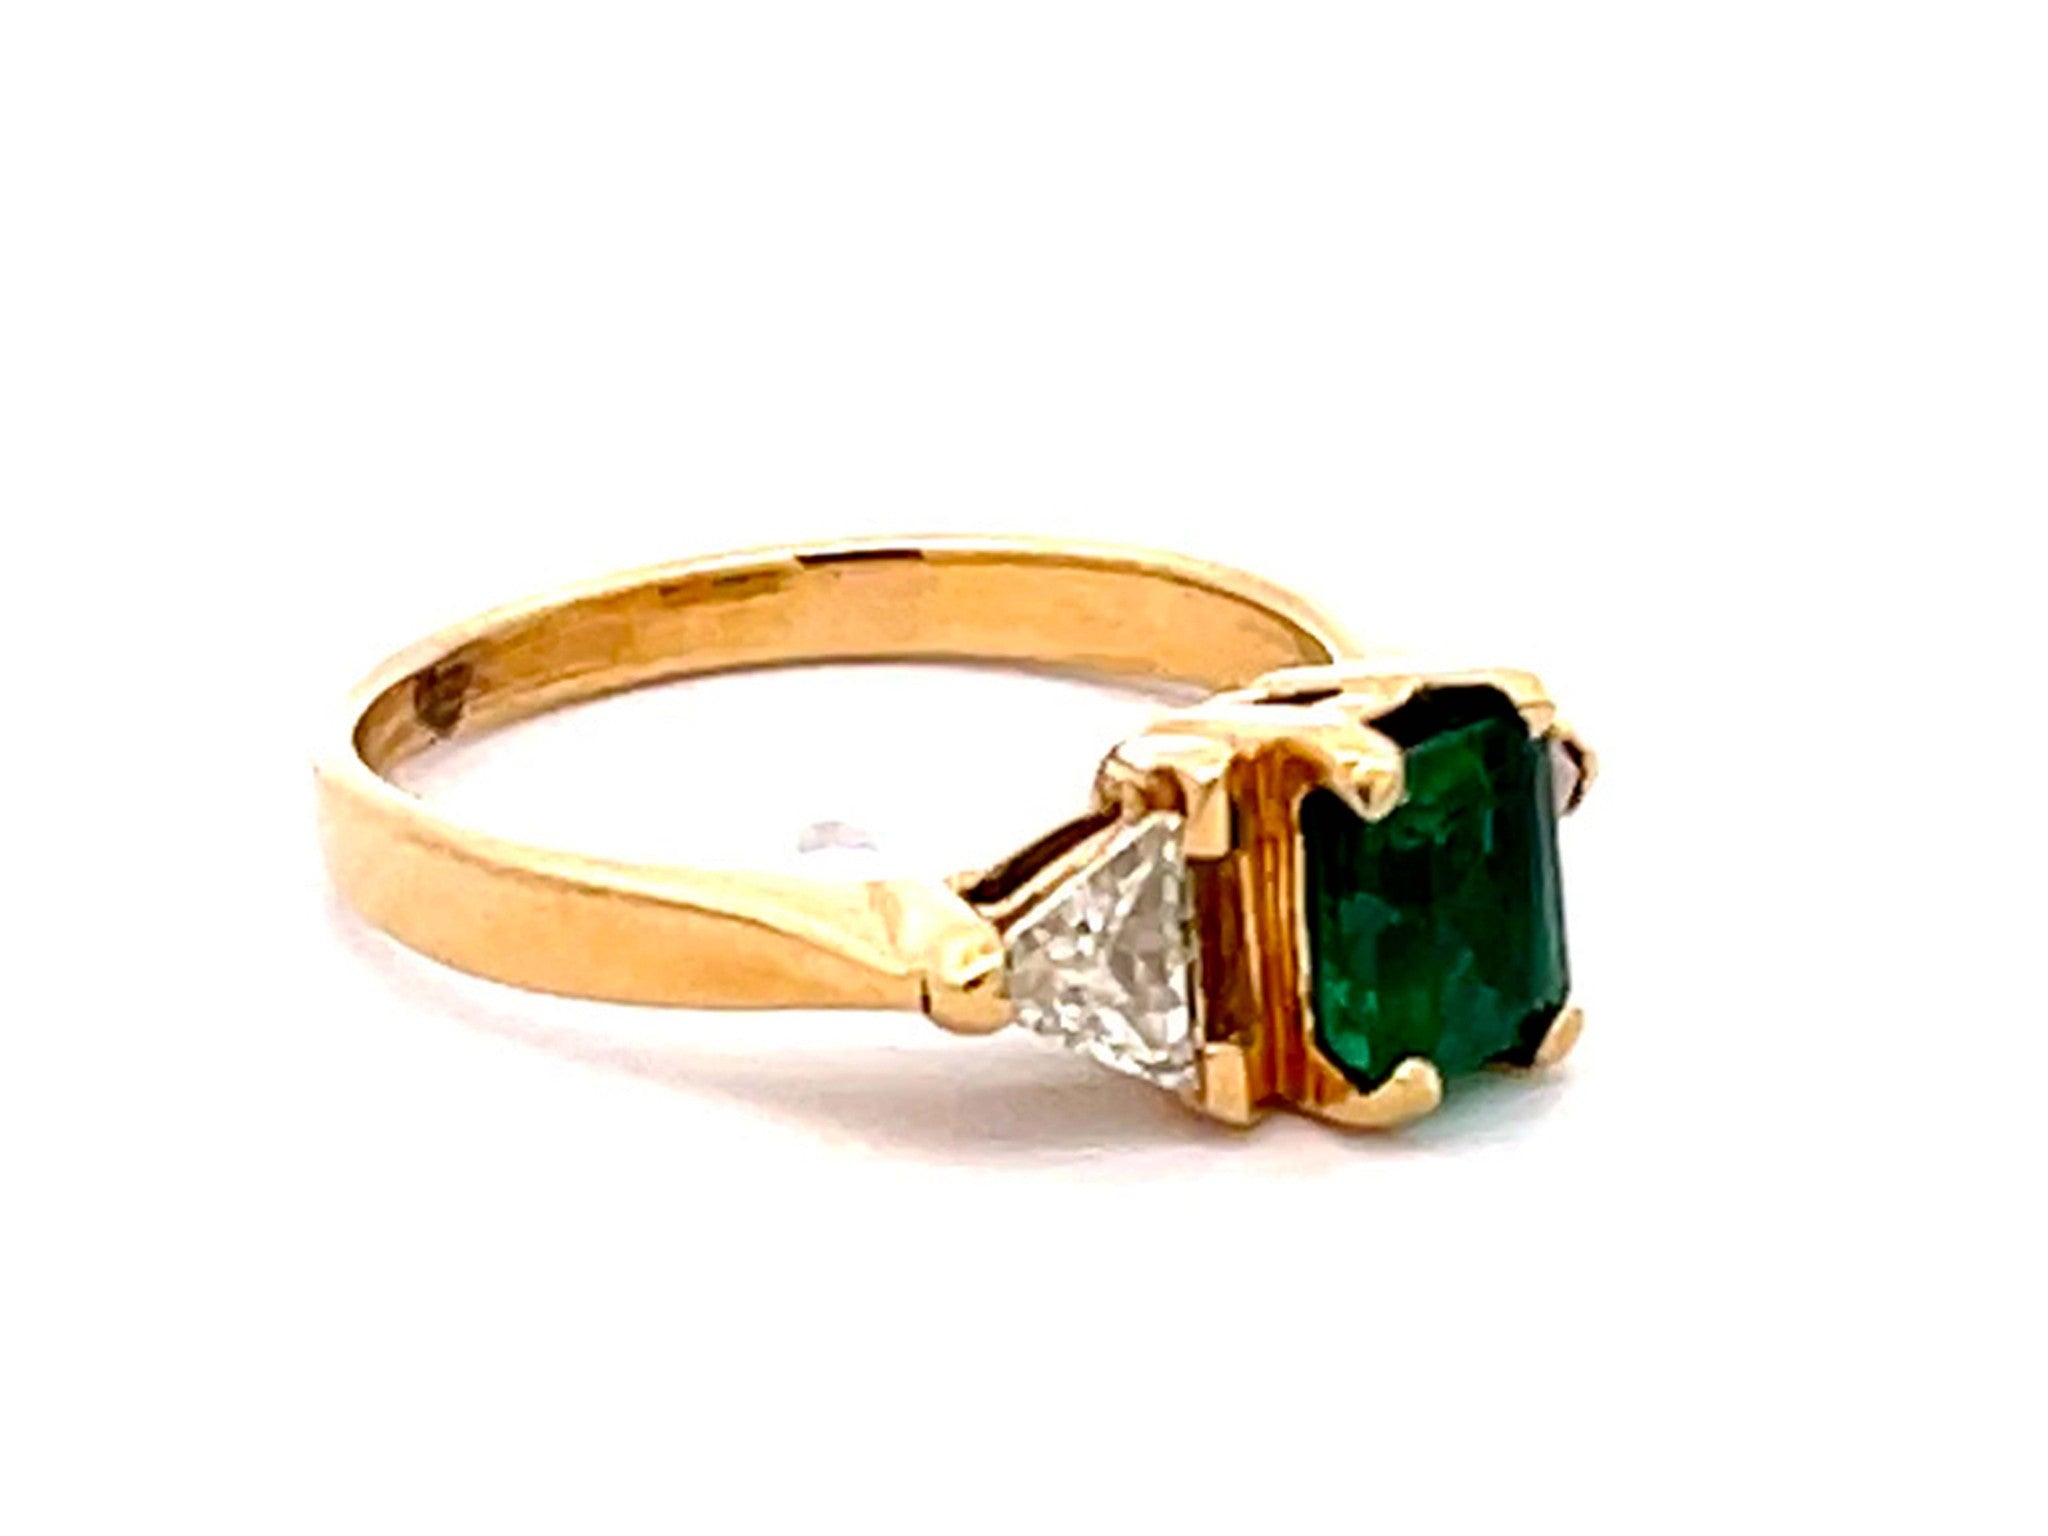 Vintage Green Emerald and Diamond Ring in 14k Yellow Gold